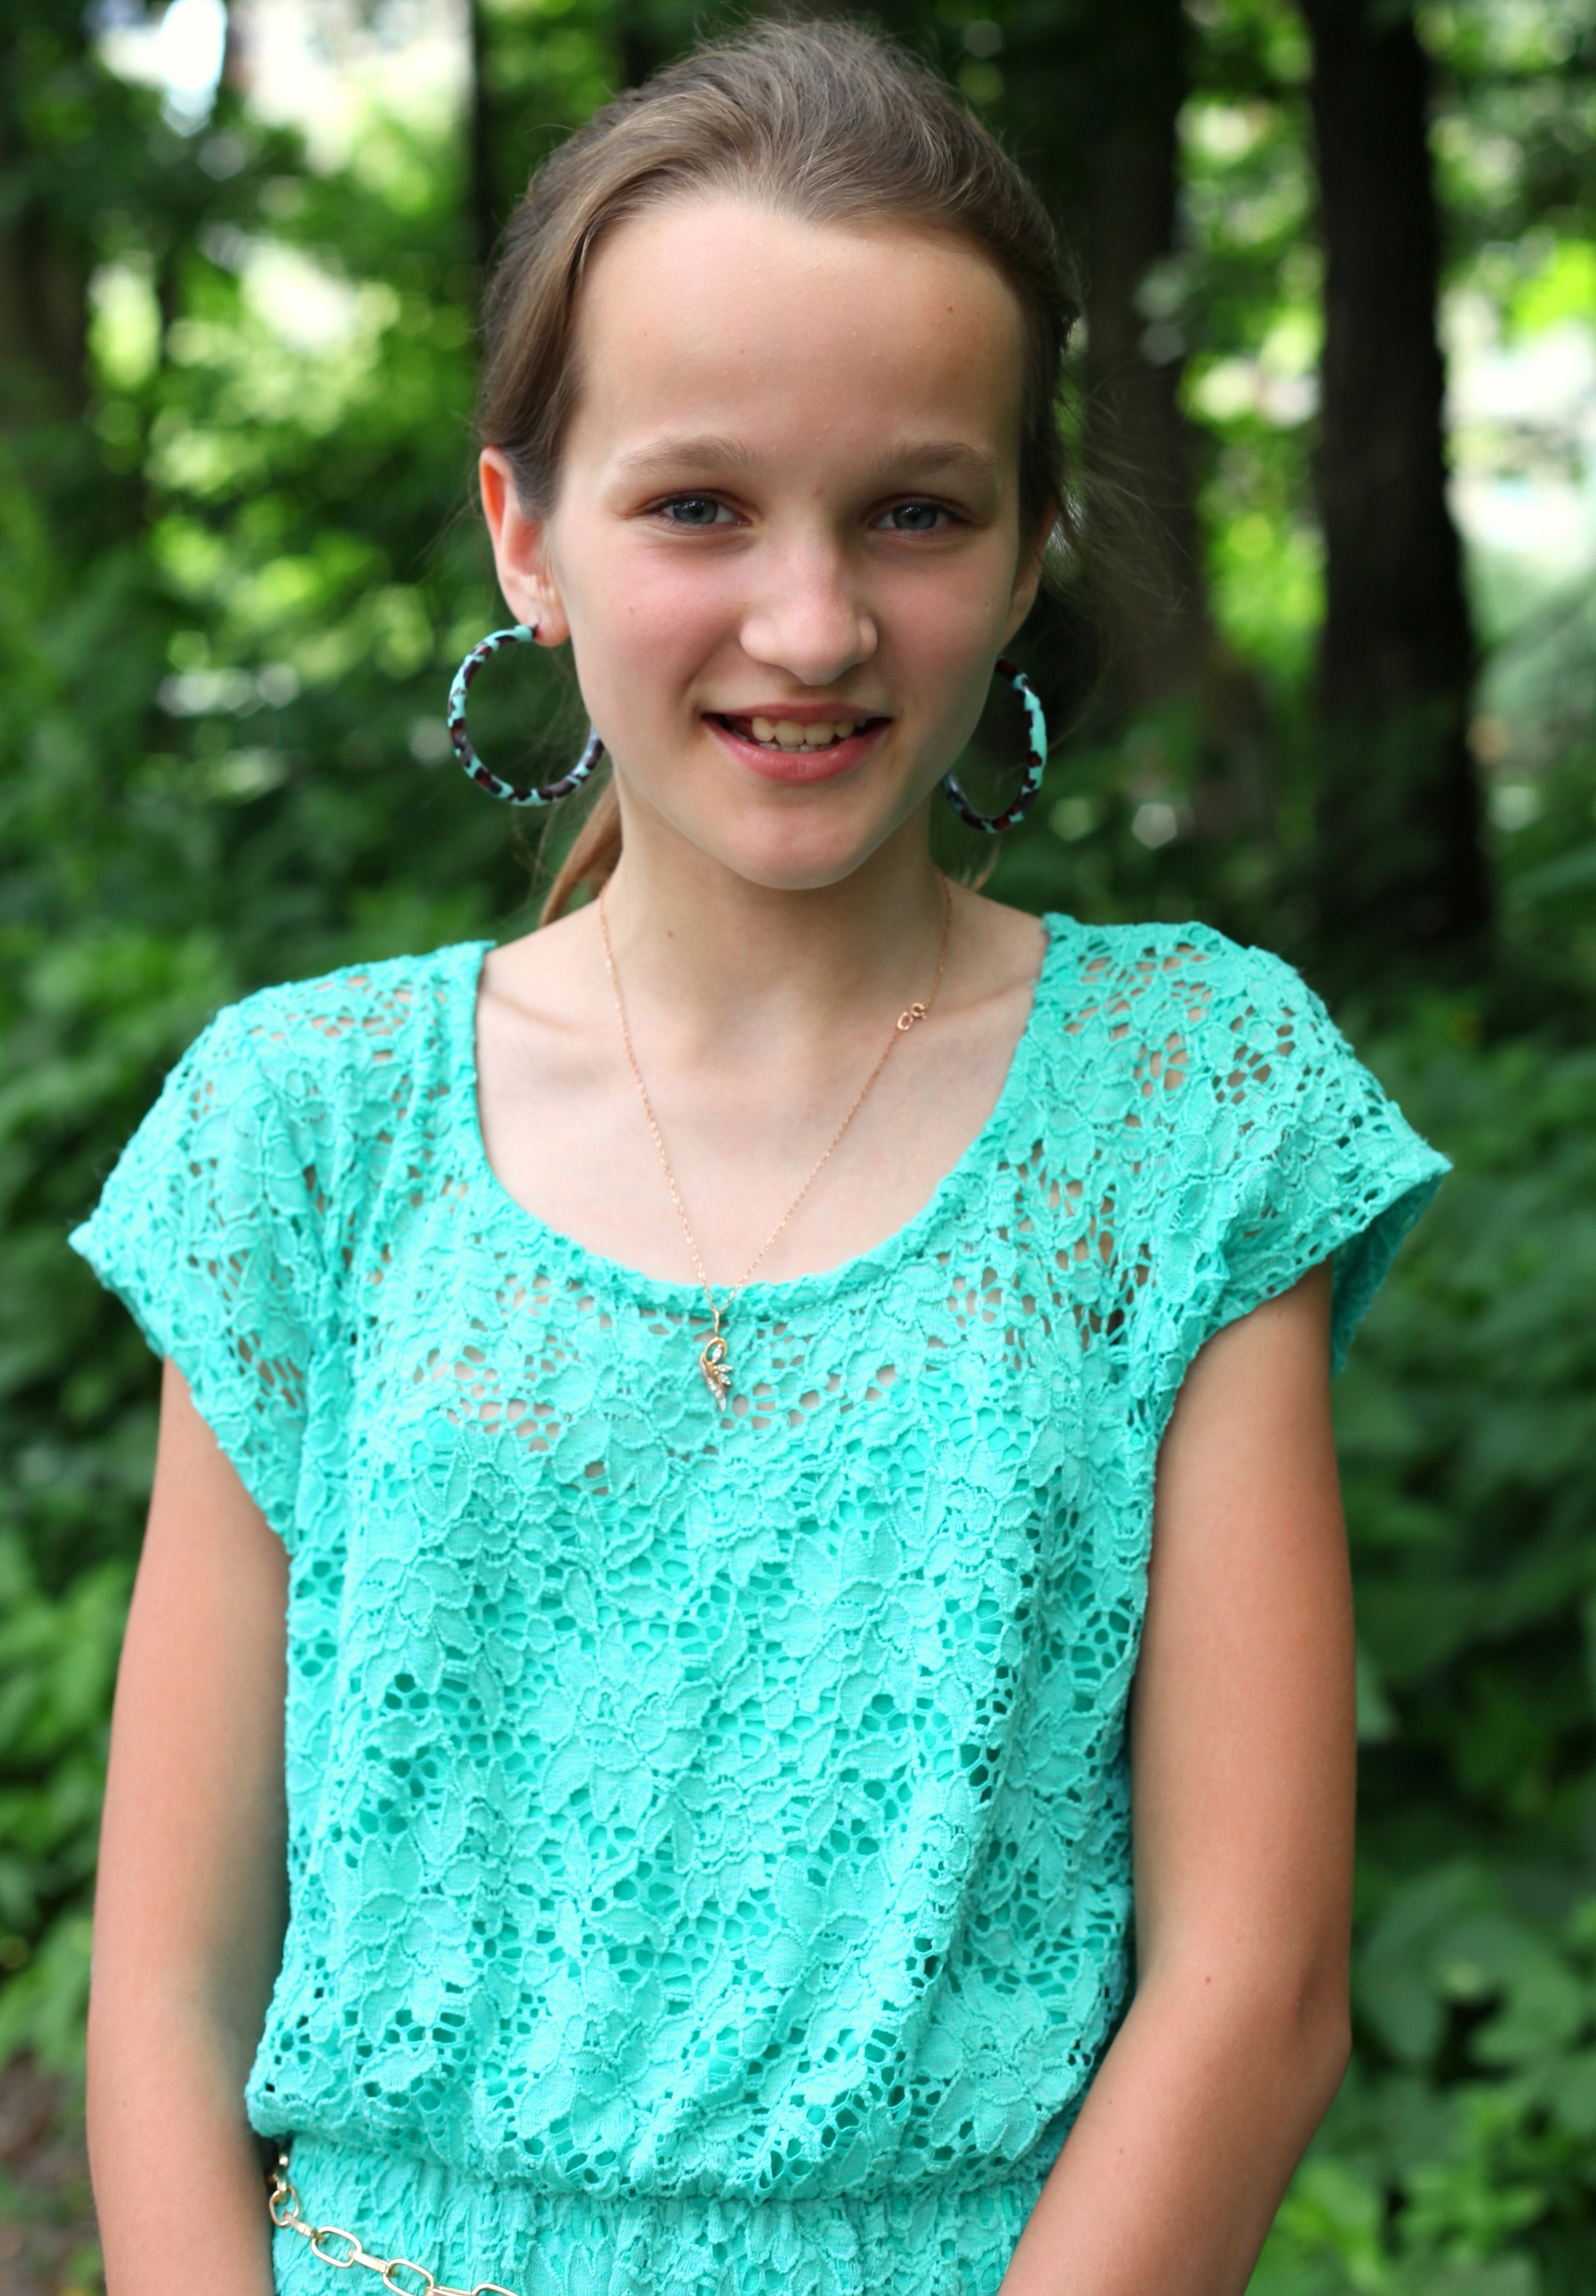 an absolutely beautiful Catholic girl with huge earrings, photographed in June 2013, portrait 21/27